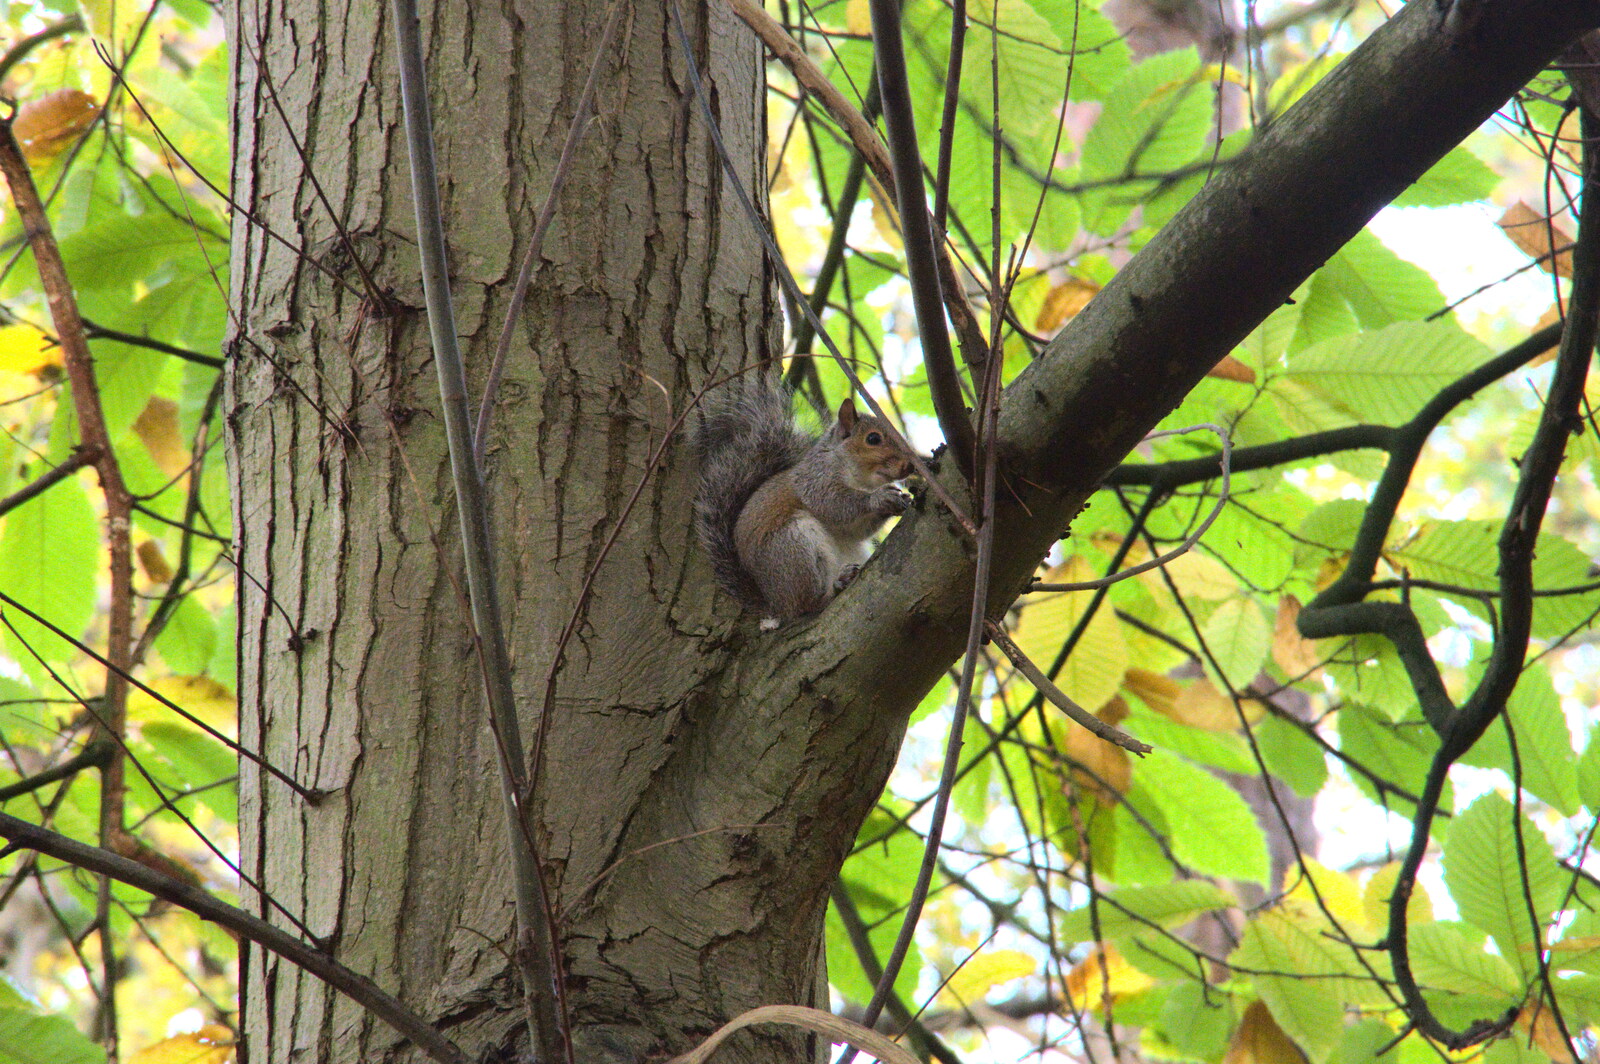 There's a baby squirrel in the crook of a branch from A Trip to Sandringham Estate, Norfolk - 31st October 2020